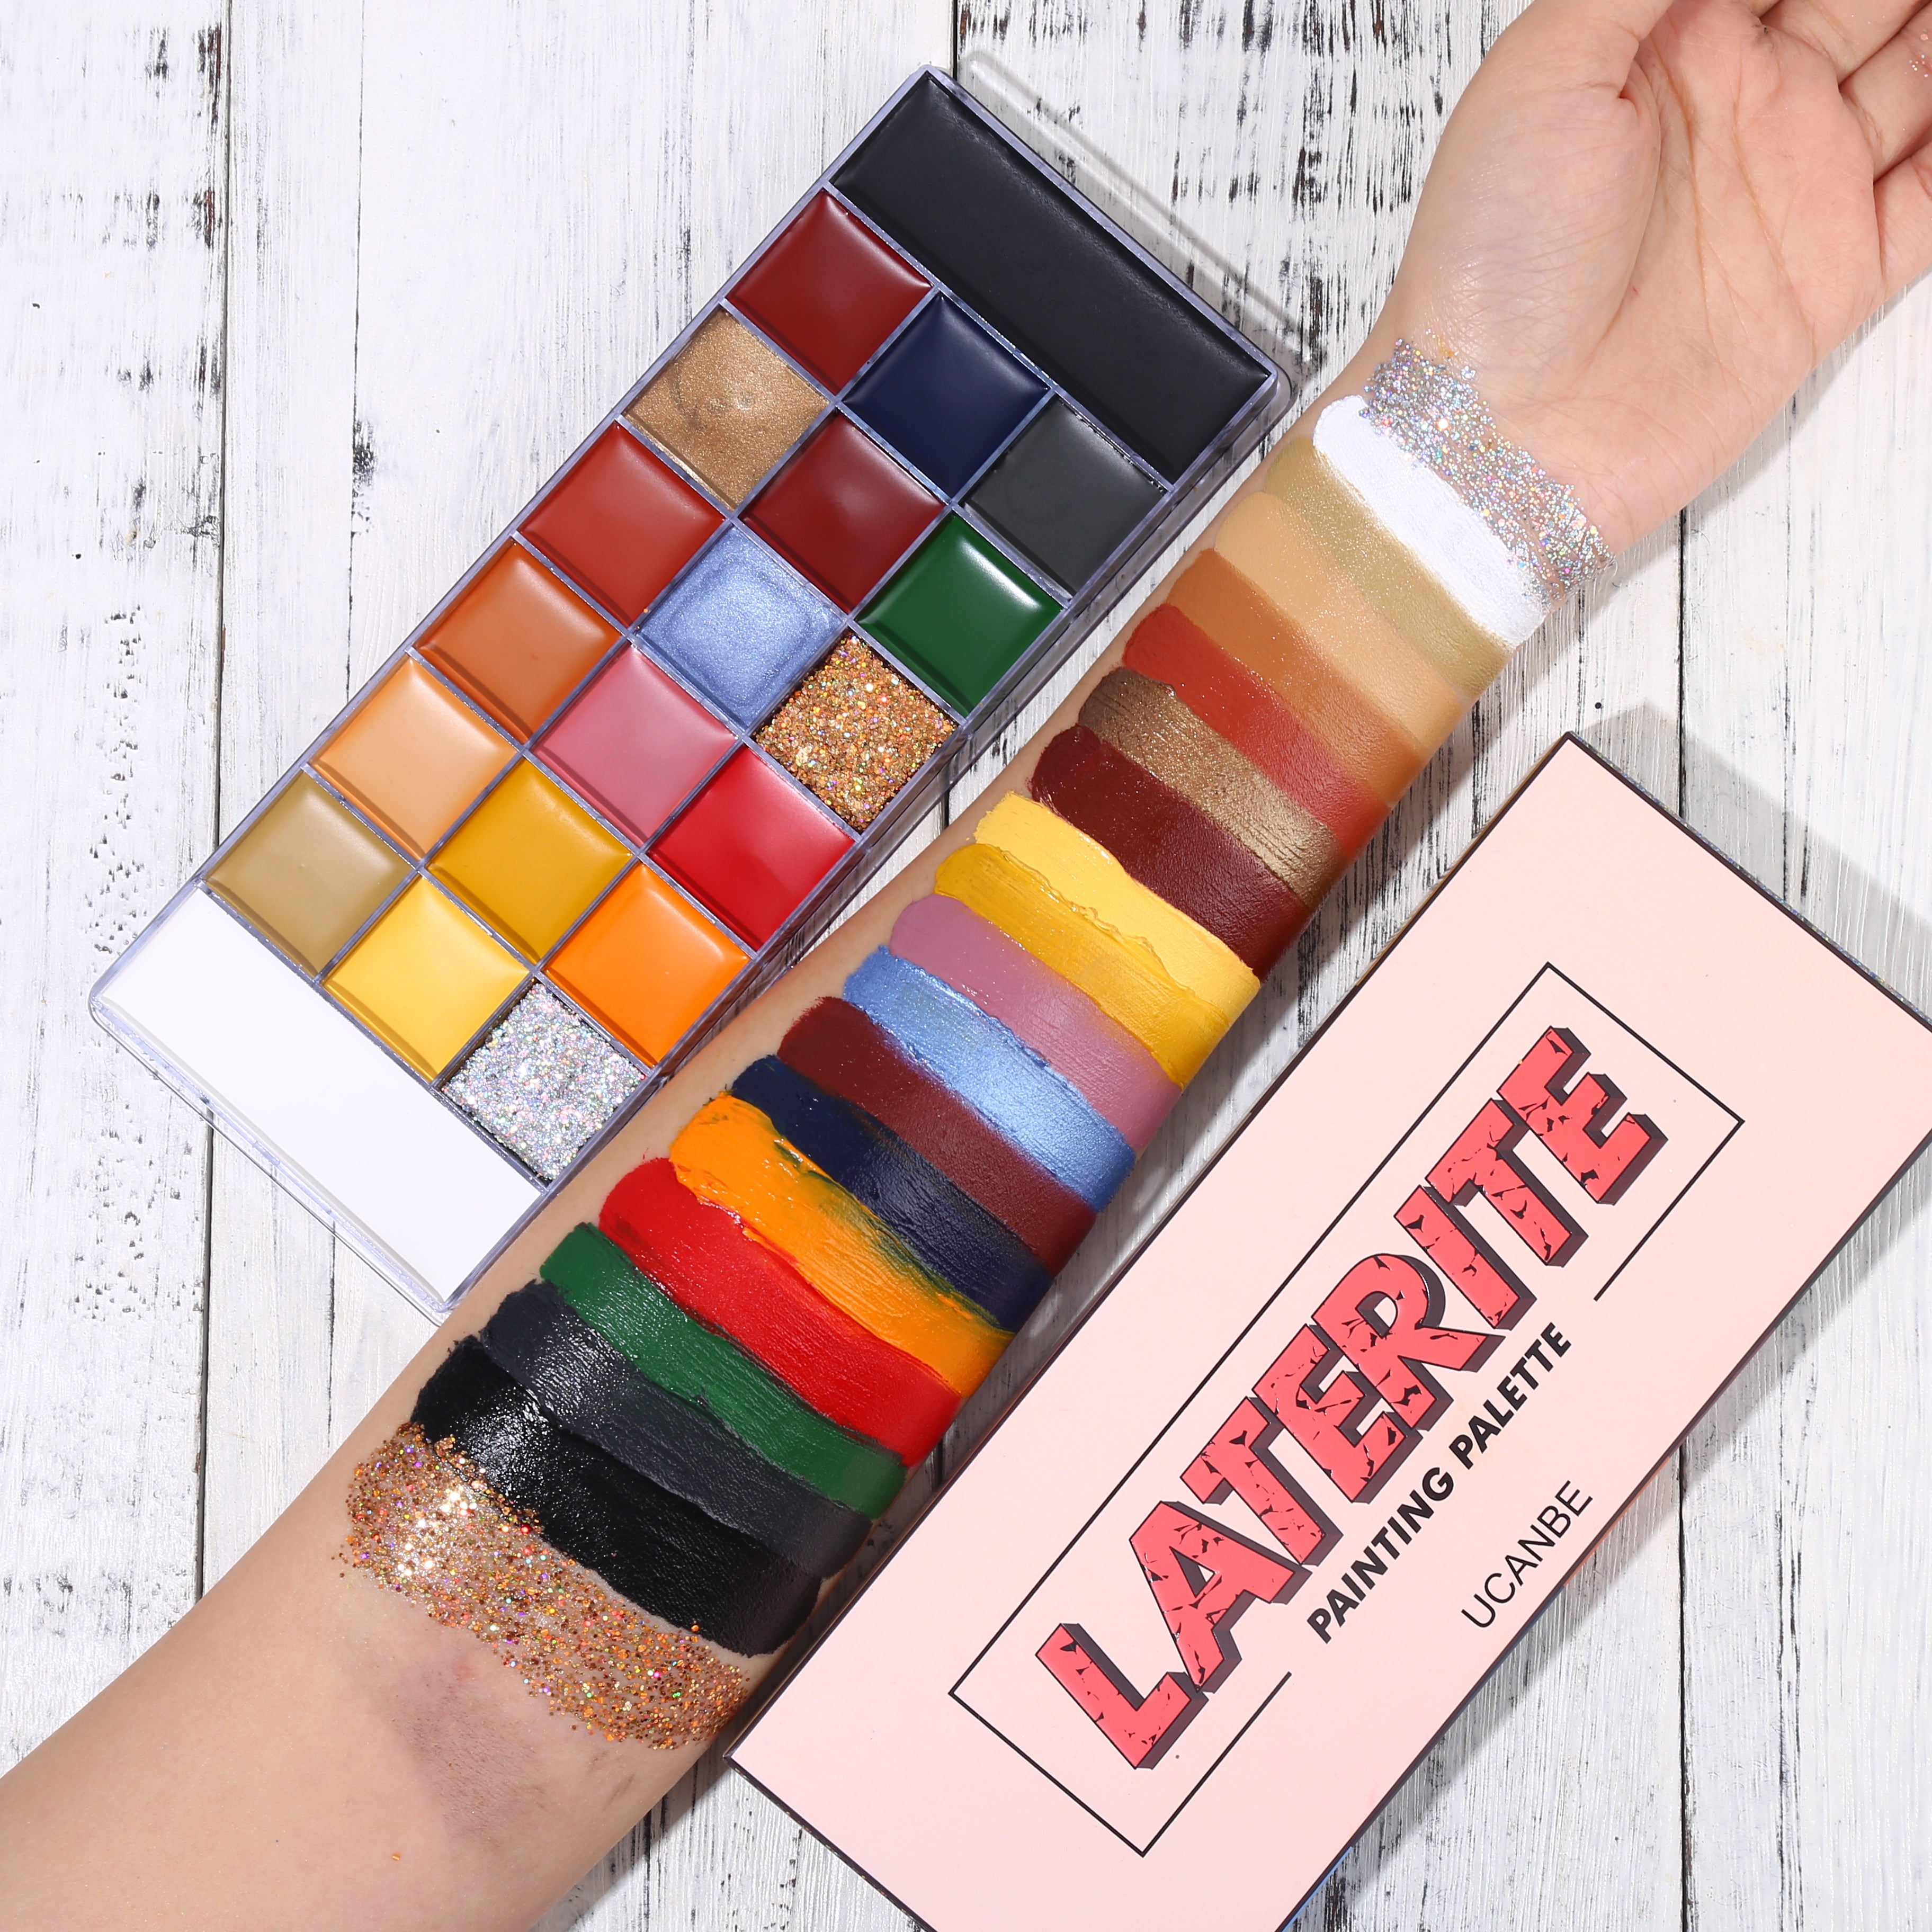 Athena Painting Palette Swatches, Ucanbe